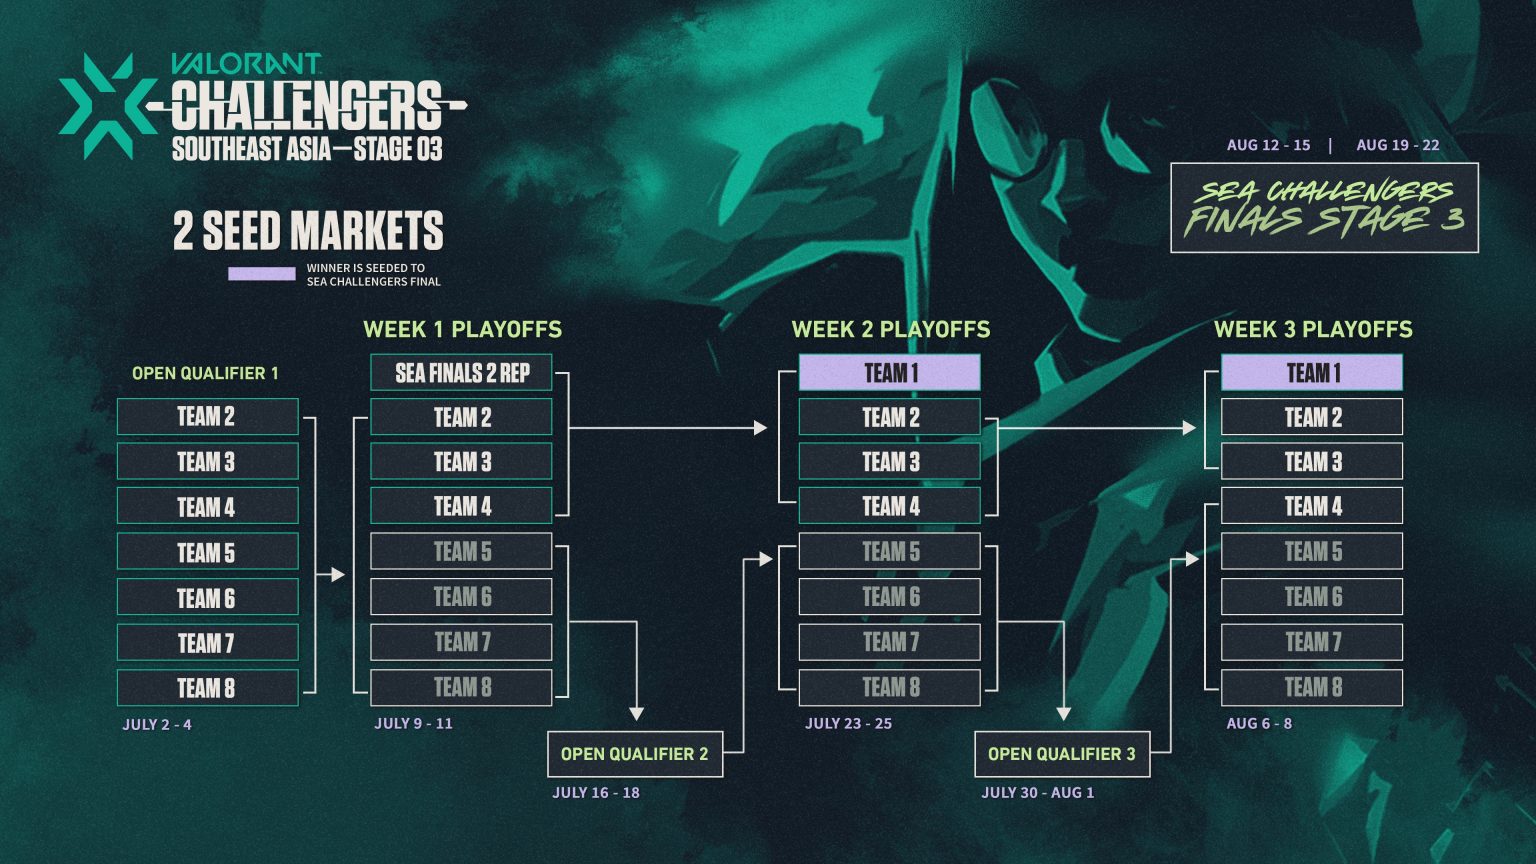 Vct 2021 Brazil Stage 3 Challengers 3 Valorant Match Schedule - Mobile